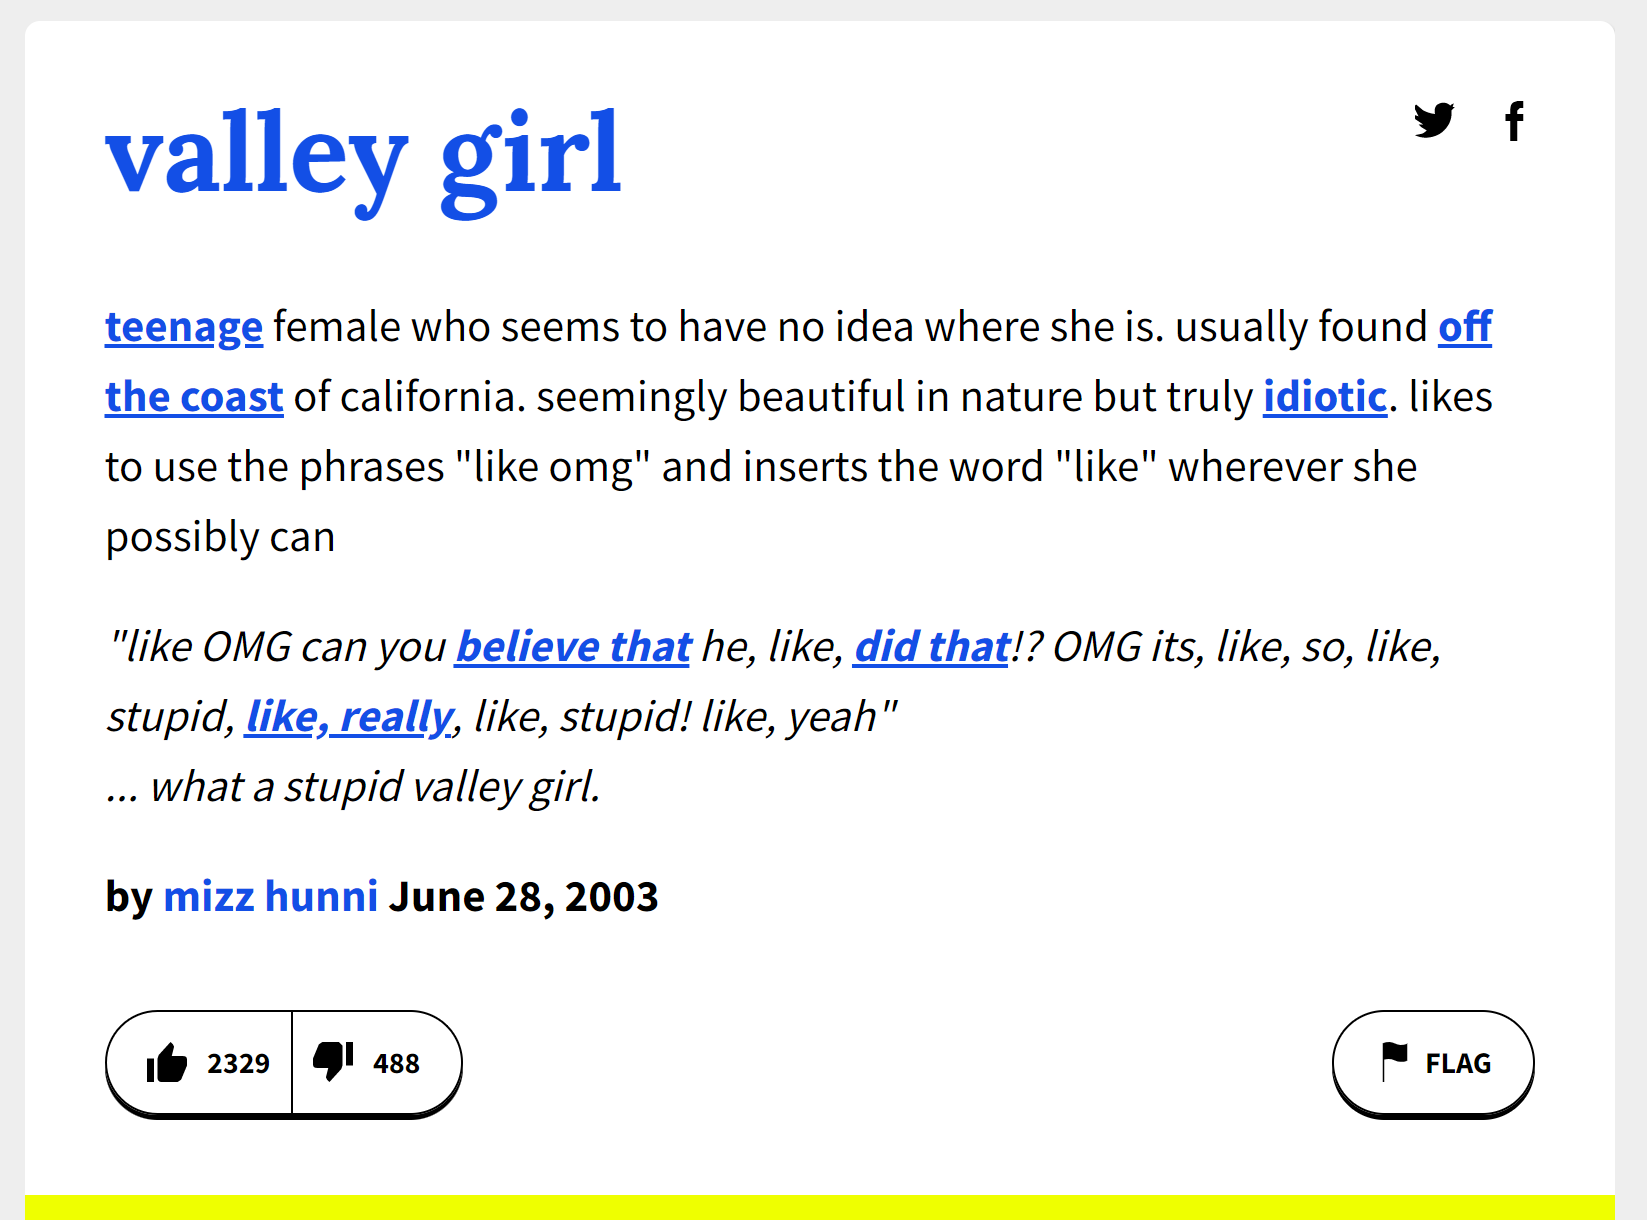 description of valley girl as defined by Urban Dictionary